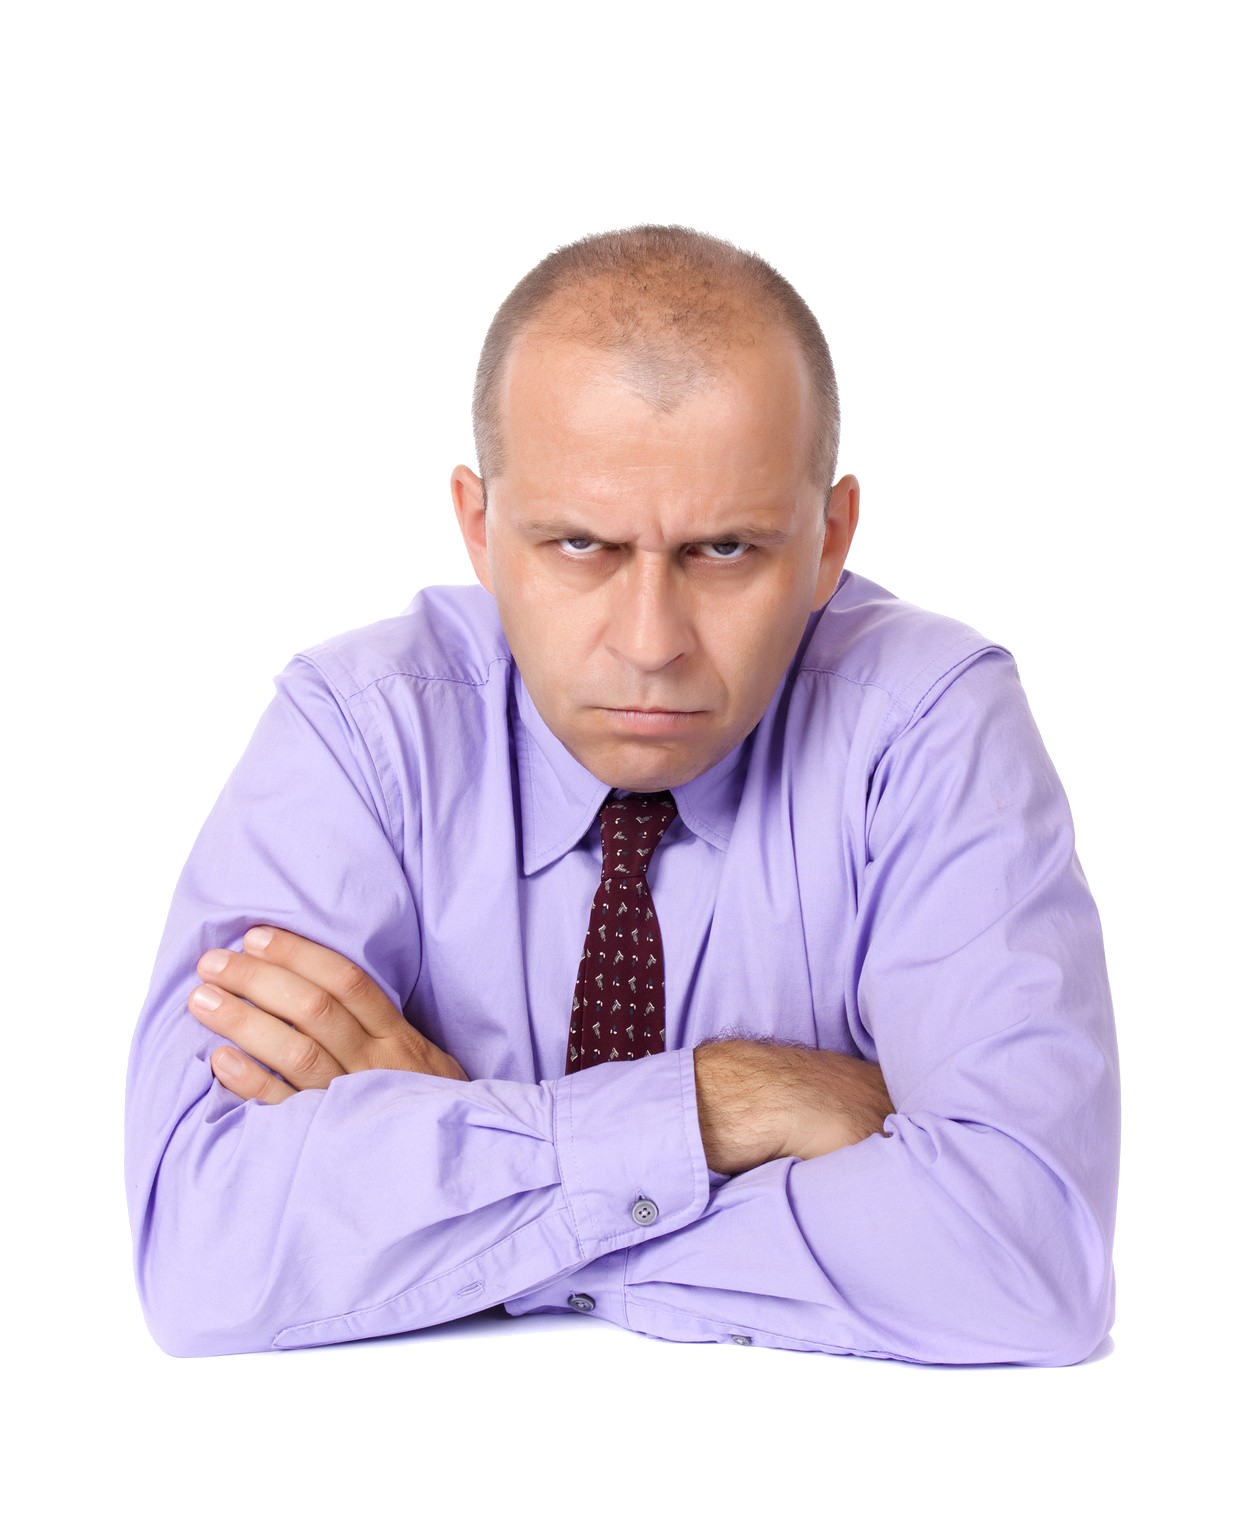 Angry Person Picture PNG Image High Quality PNG Image